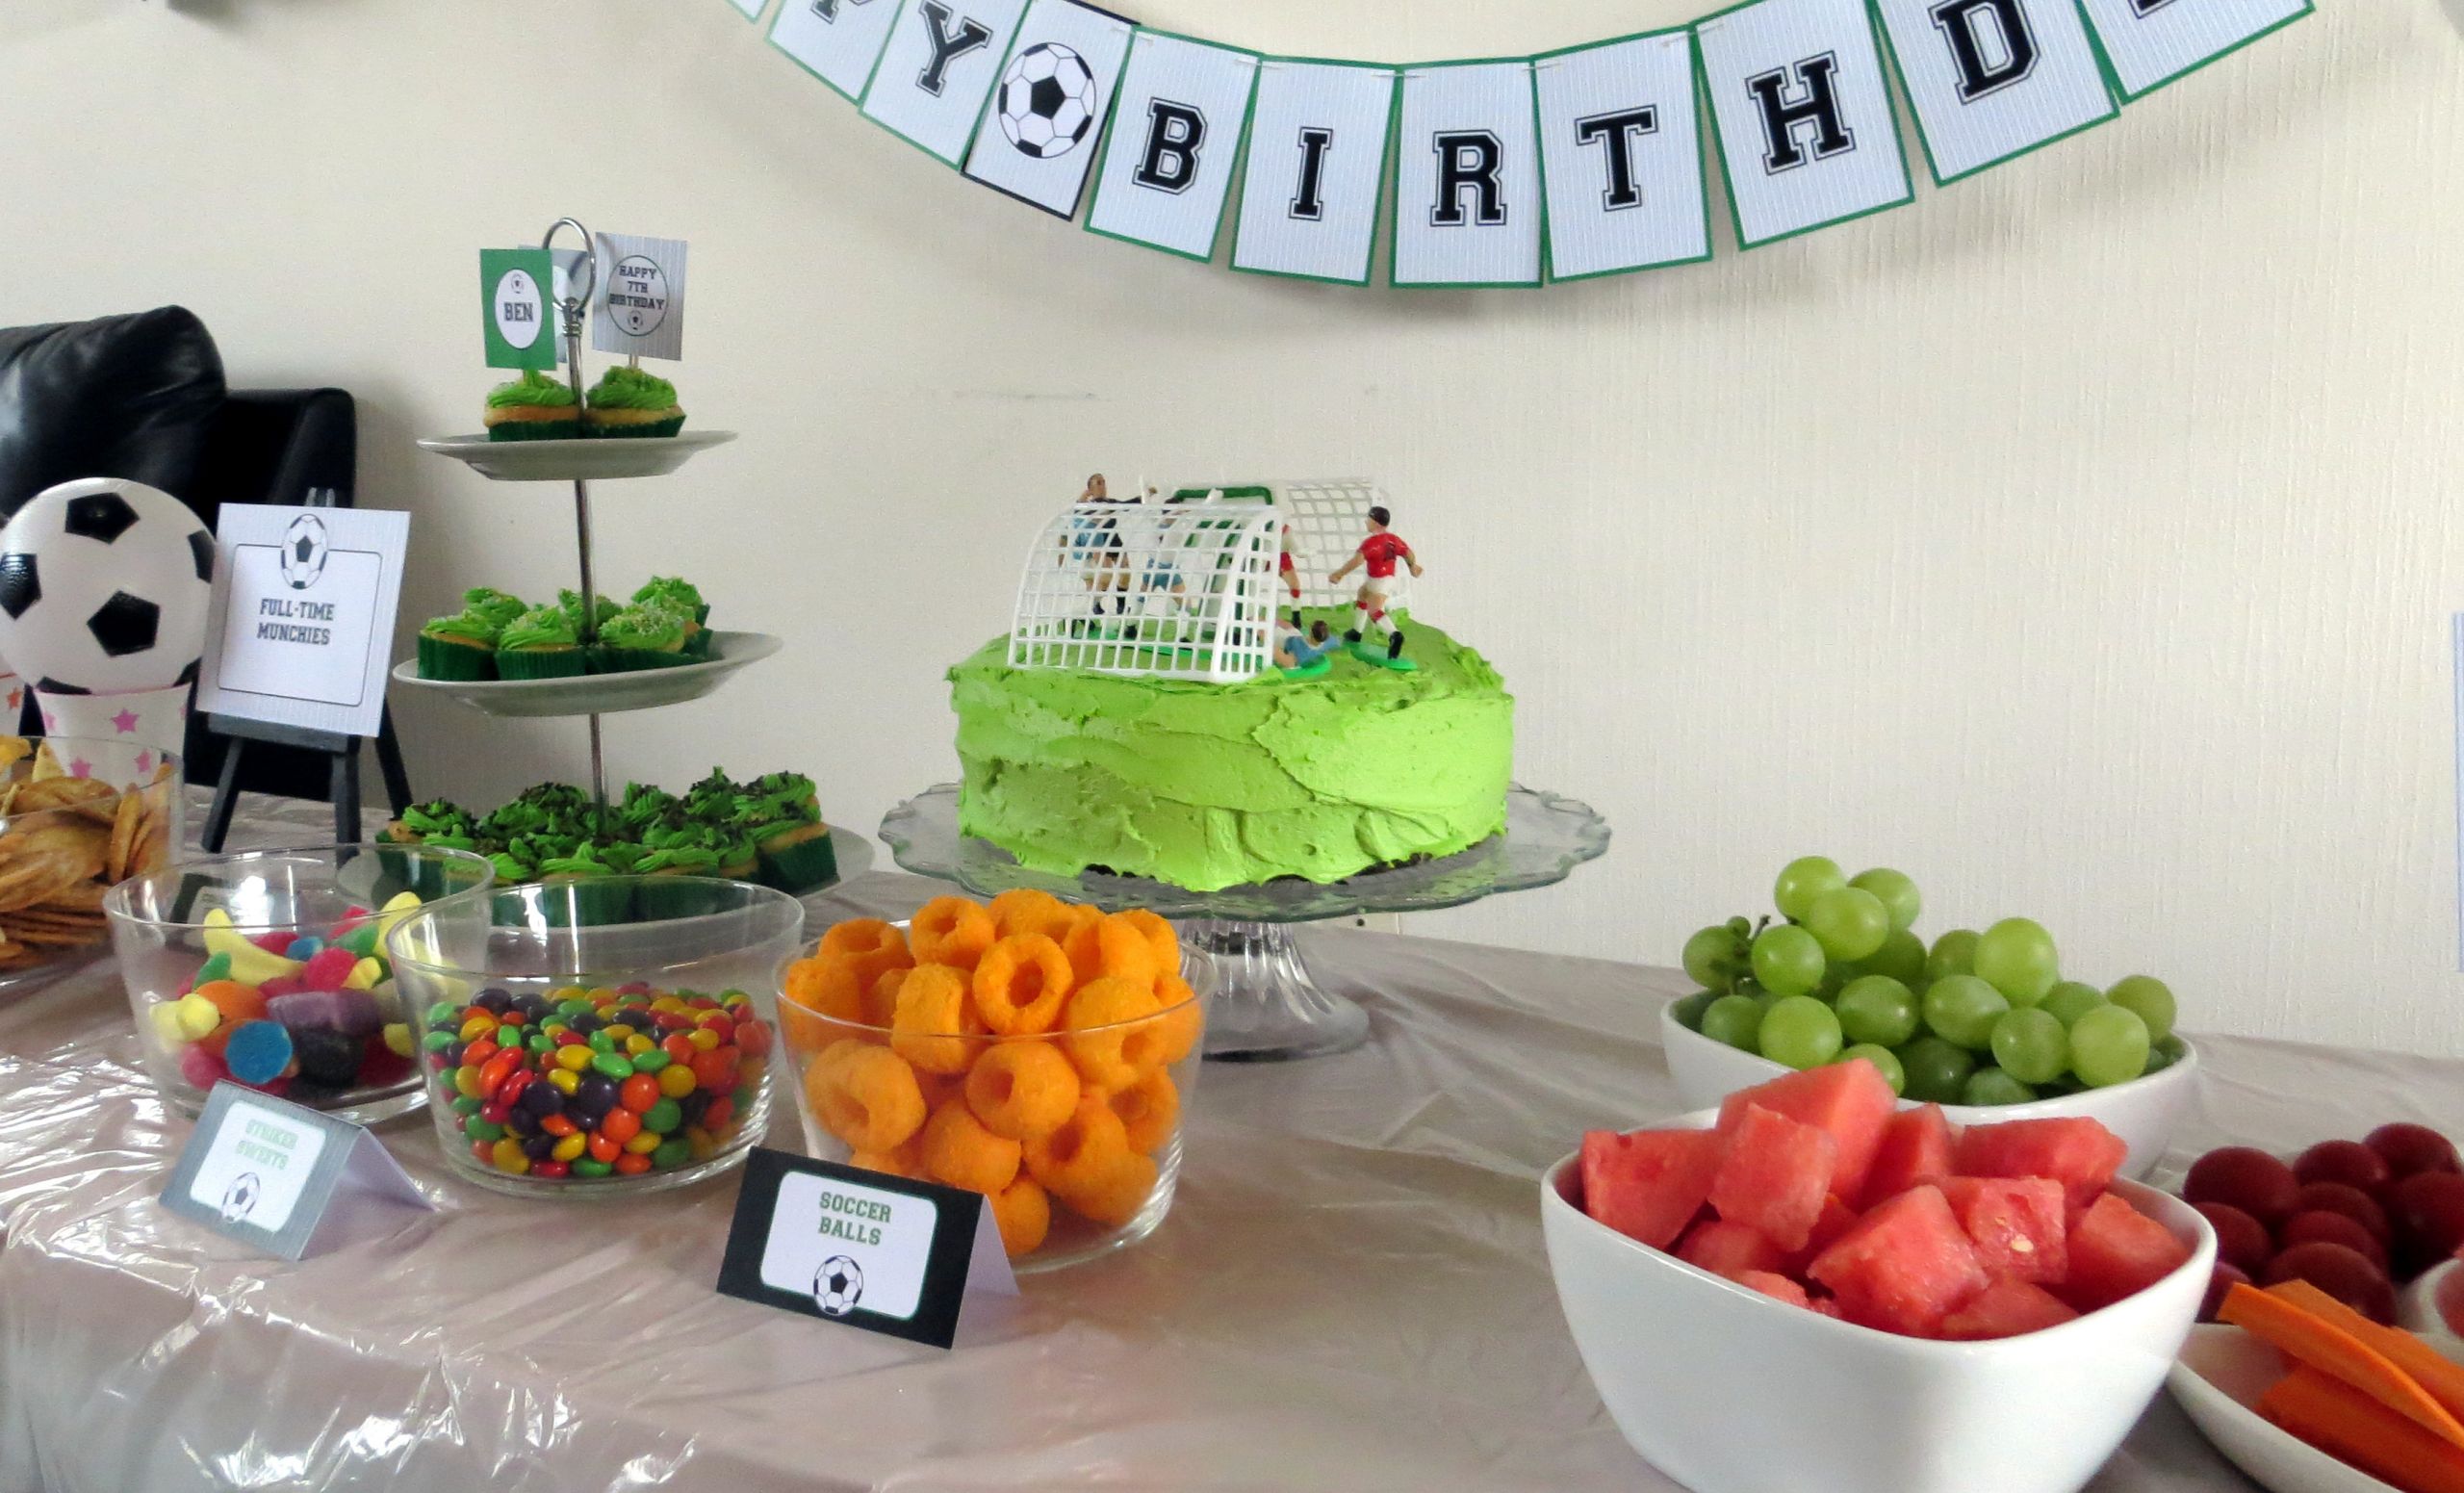 Soccer Birthday Party Ideas
 Super Soccer Party Ideas